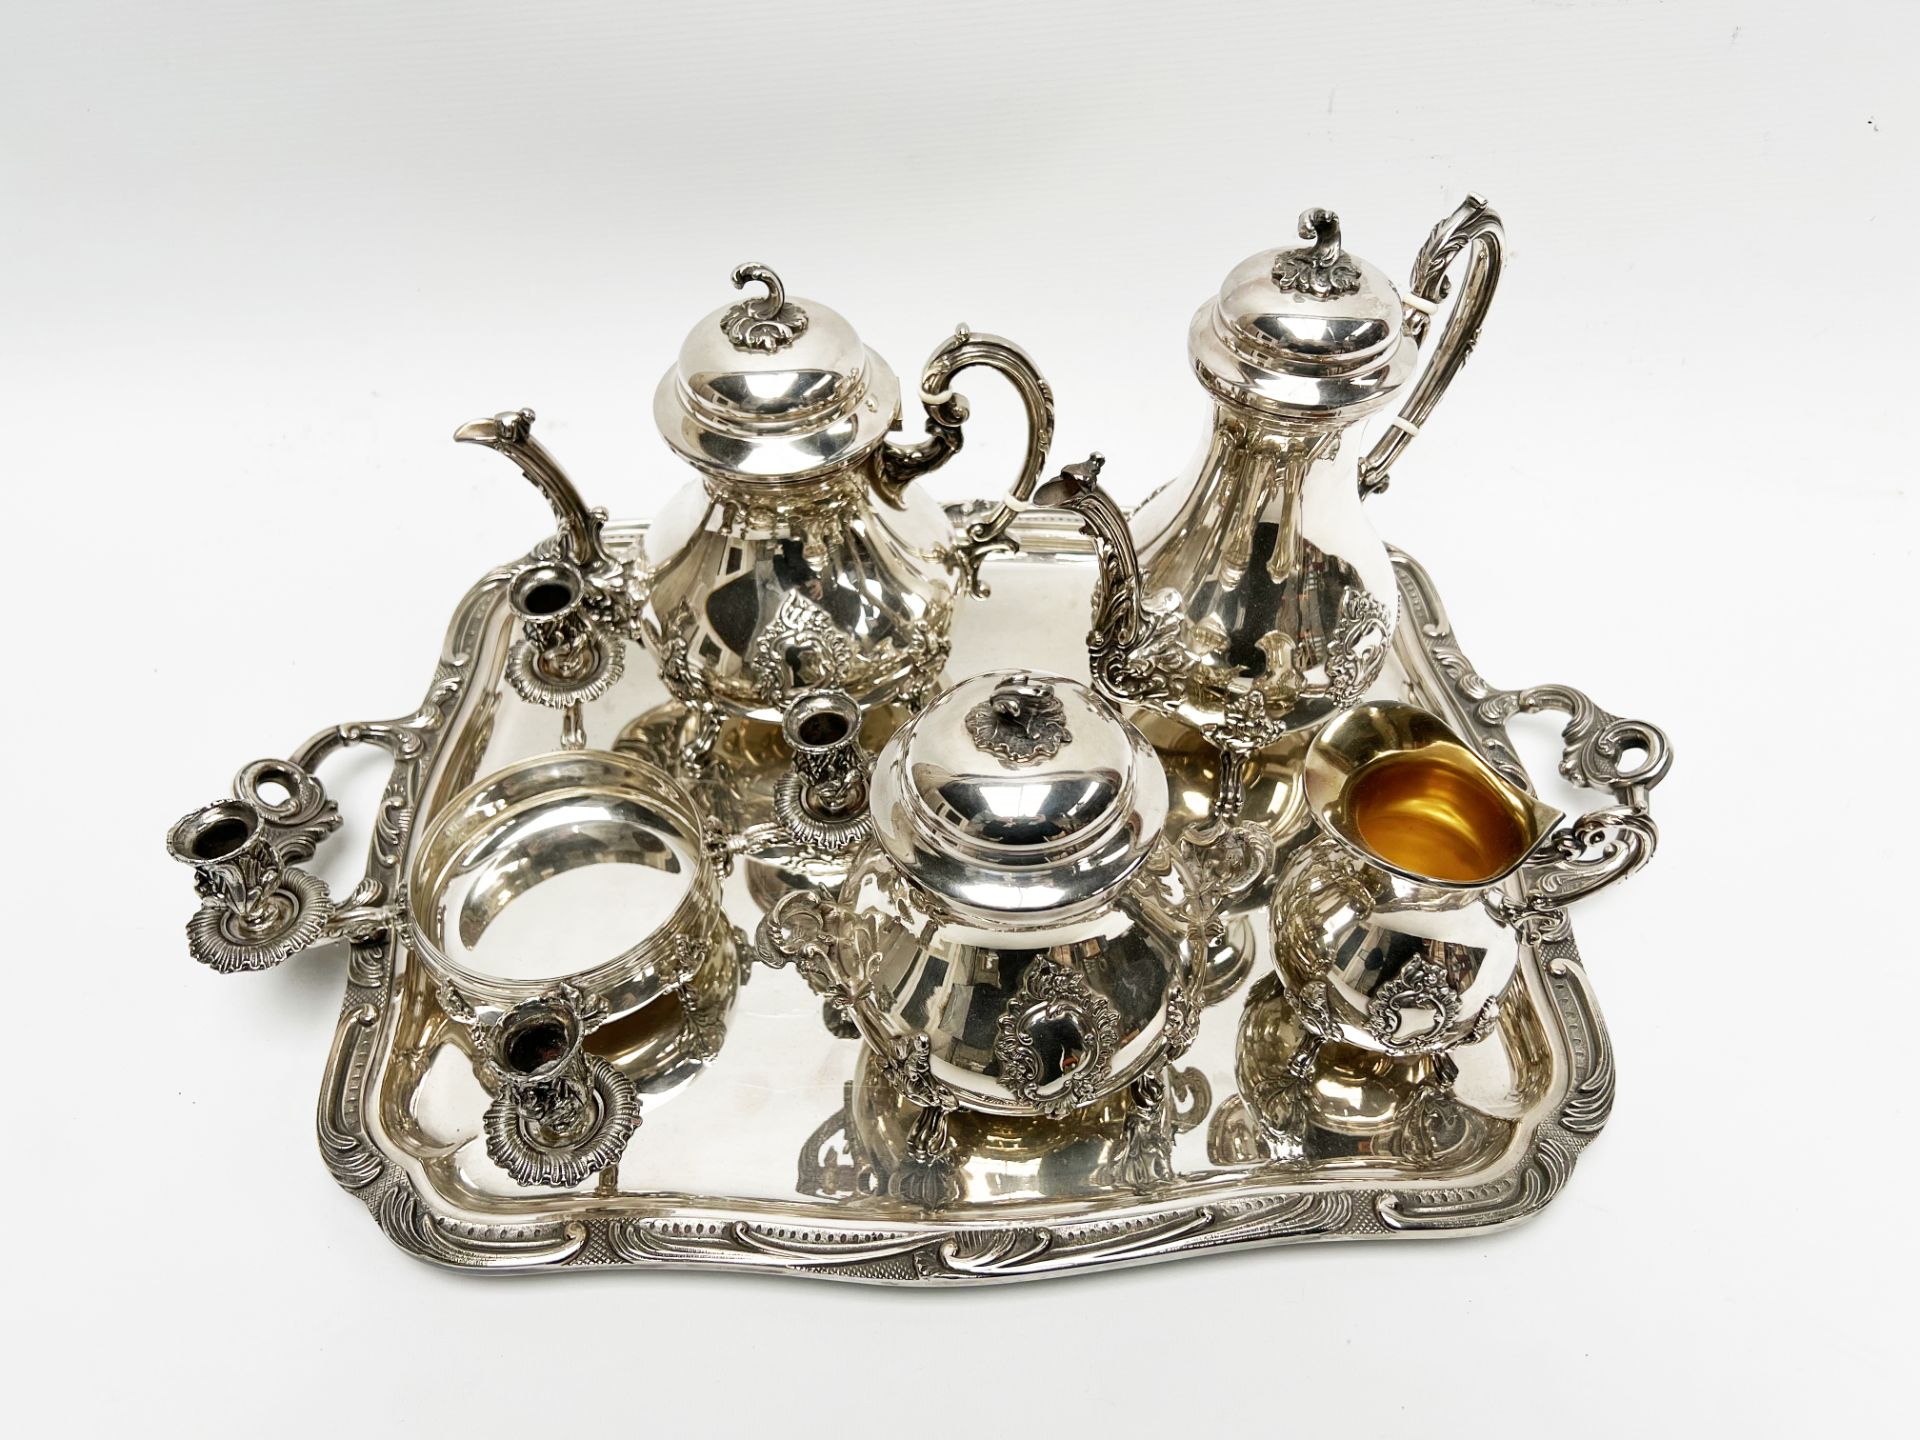 Silver metal tea and coffee service, with rockery patterns and acanthus leaves, including a teapot, 